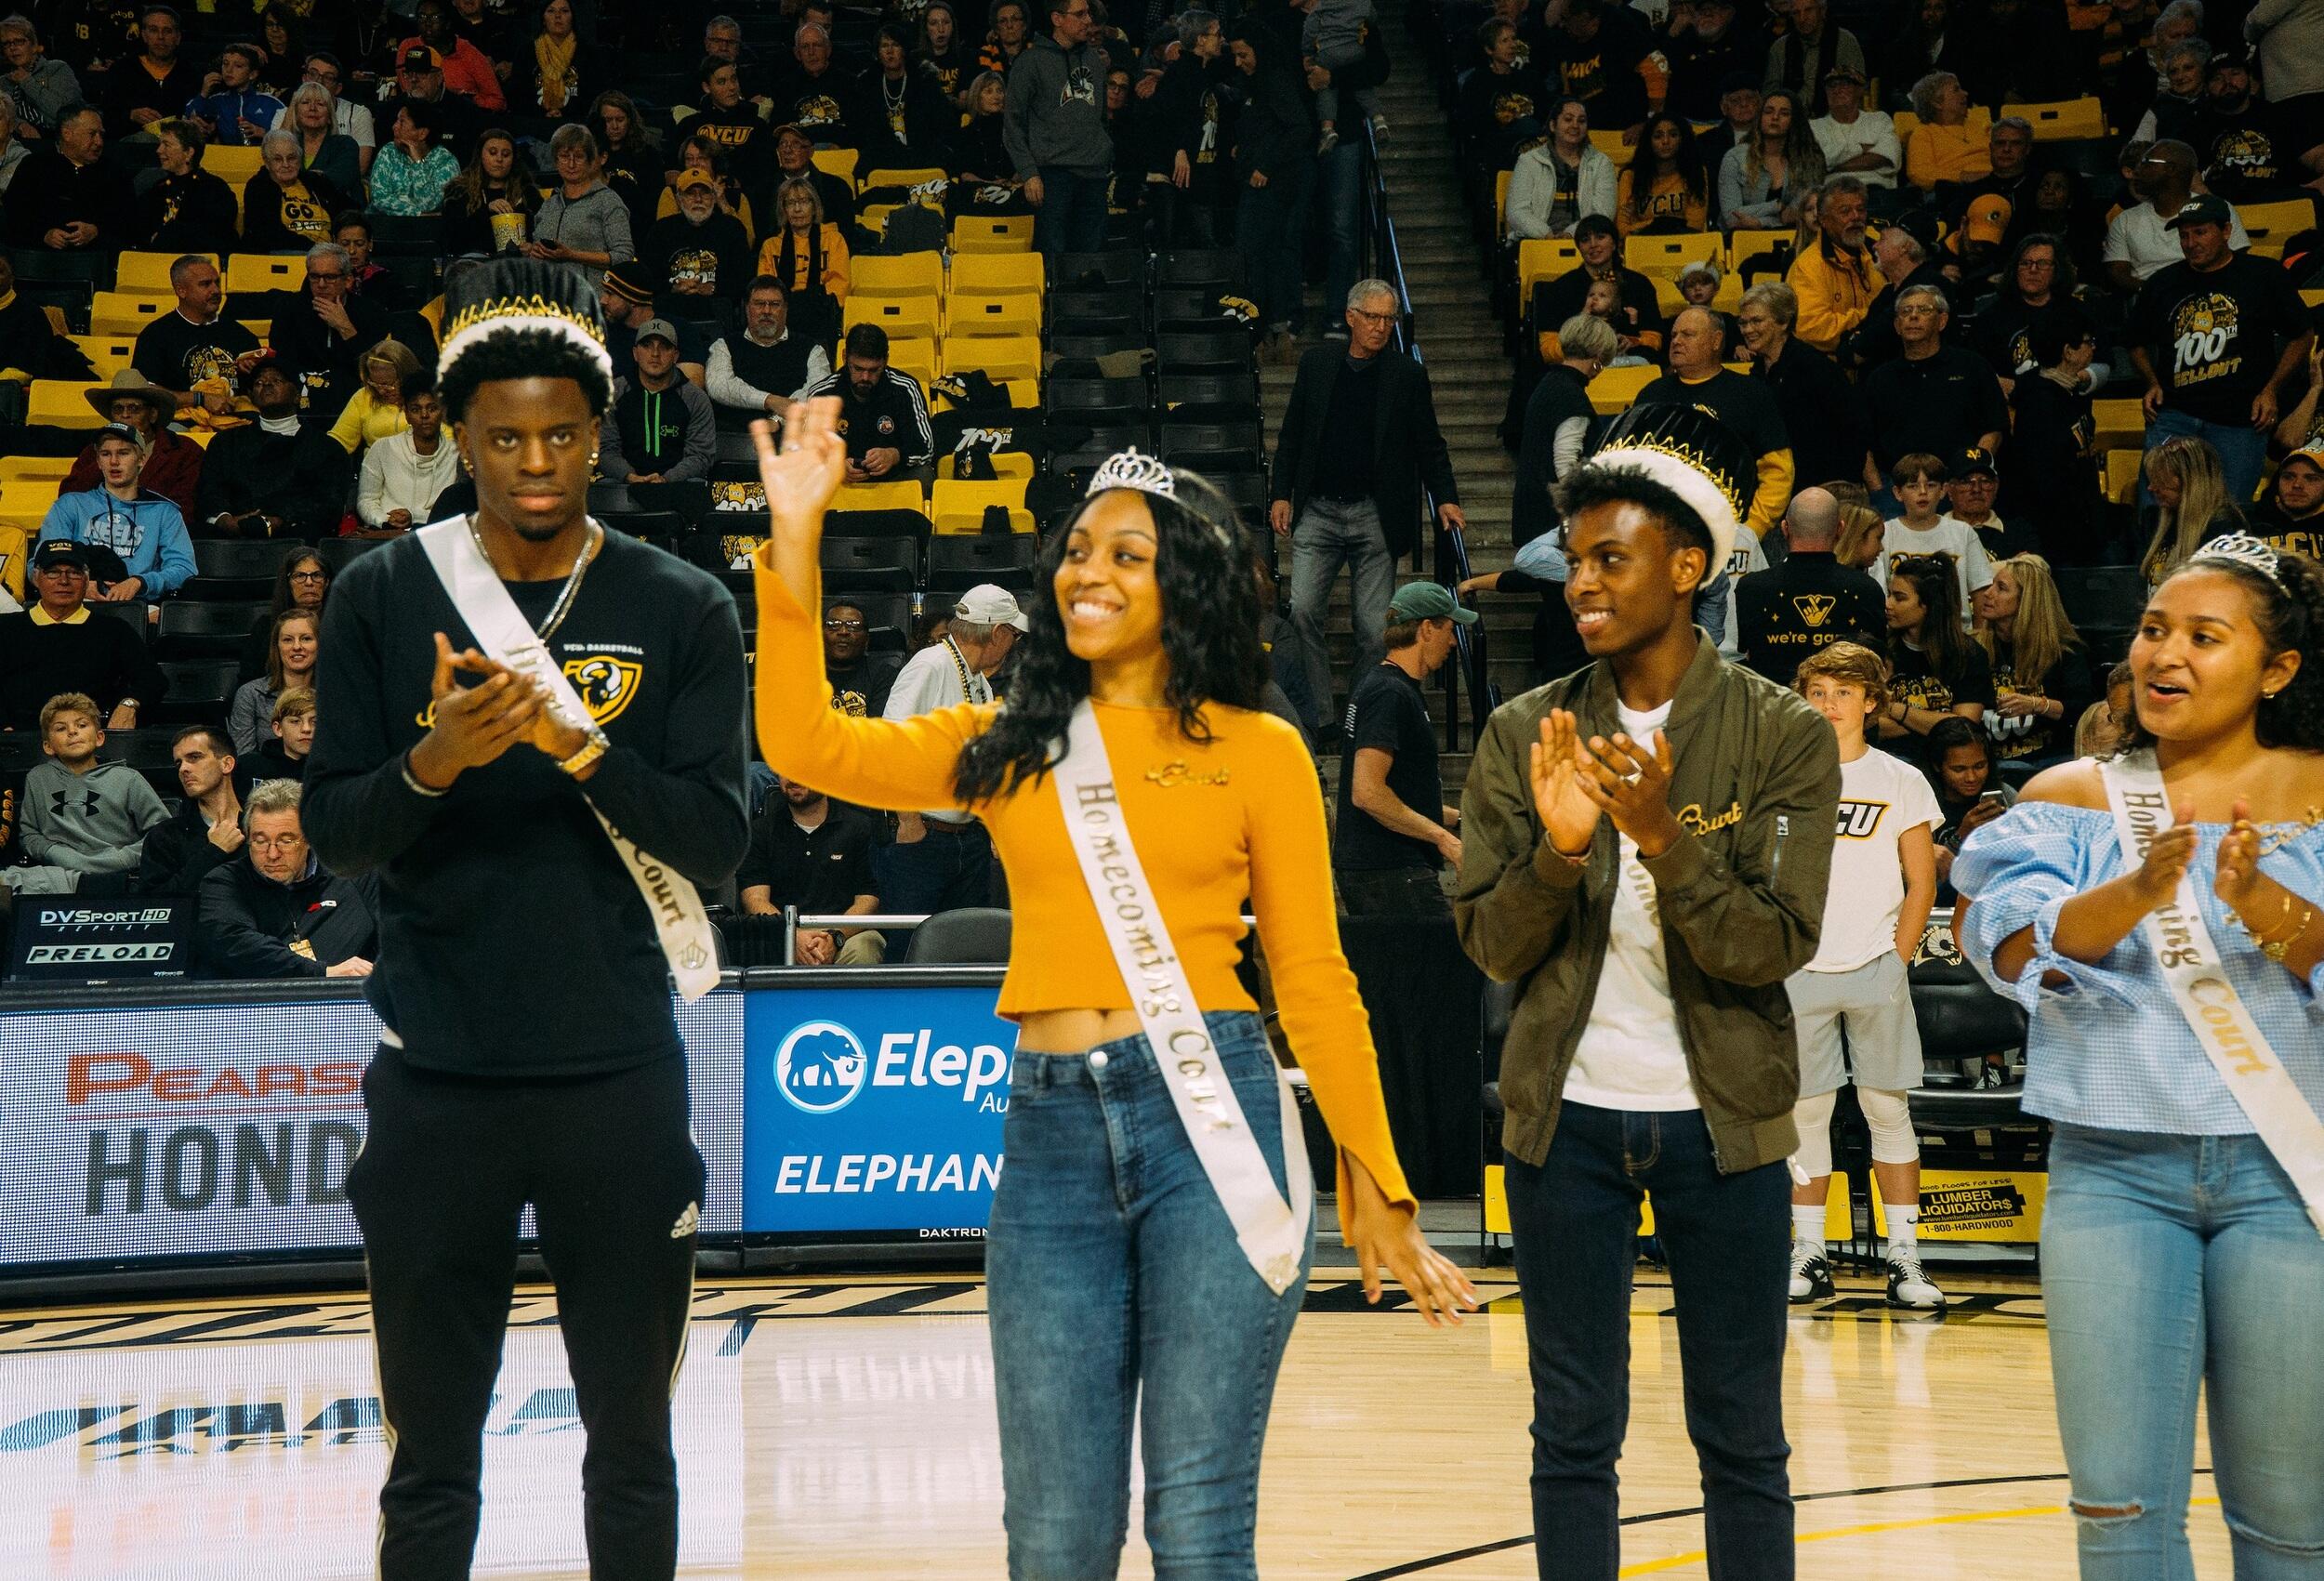 Two men and two women wearing crowns and sashes standing on a basketball court. 